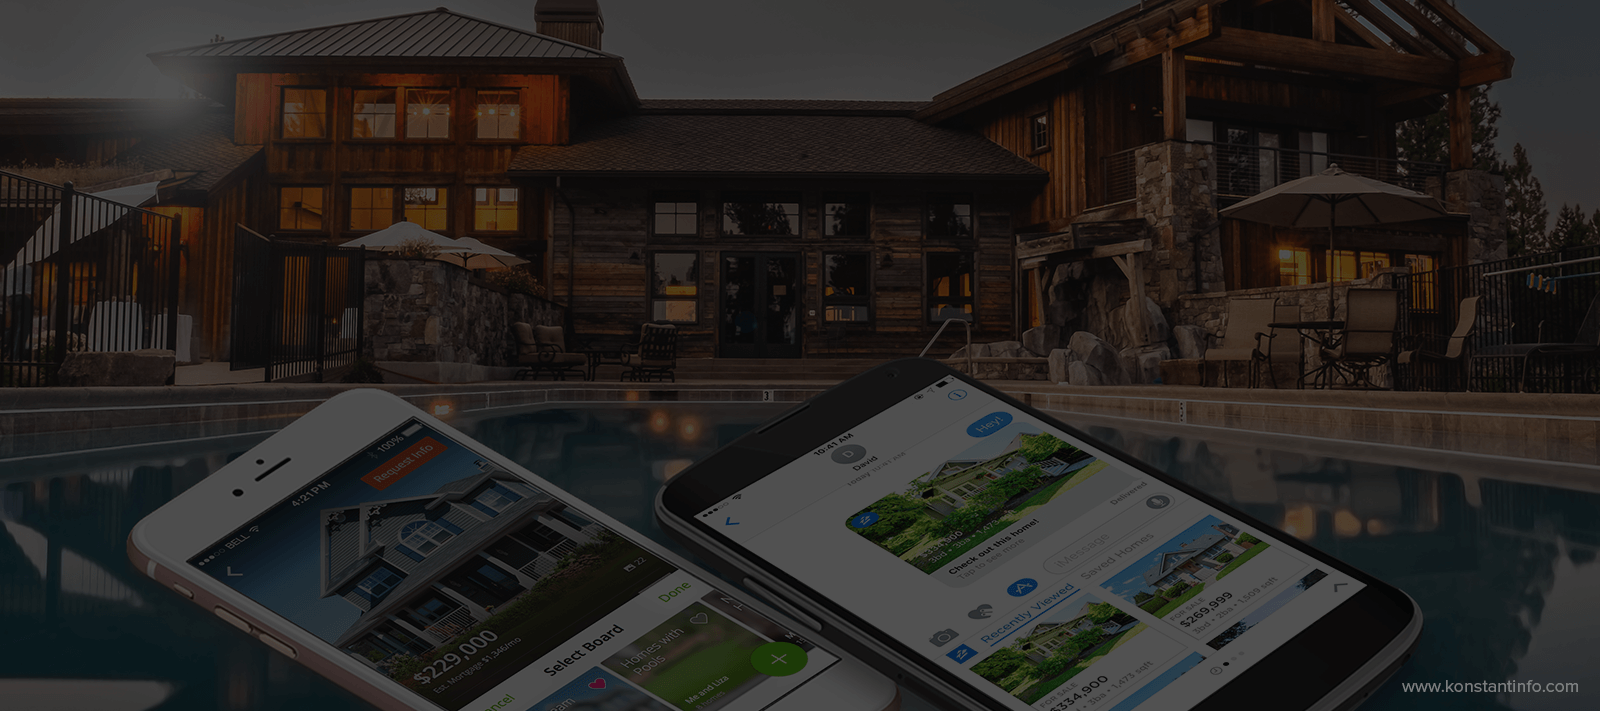 How to Develop a Real Estate App like Zillow or Trulia